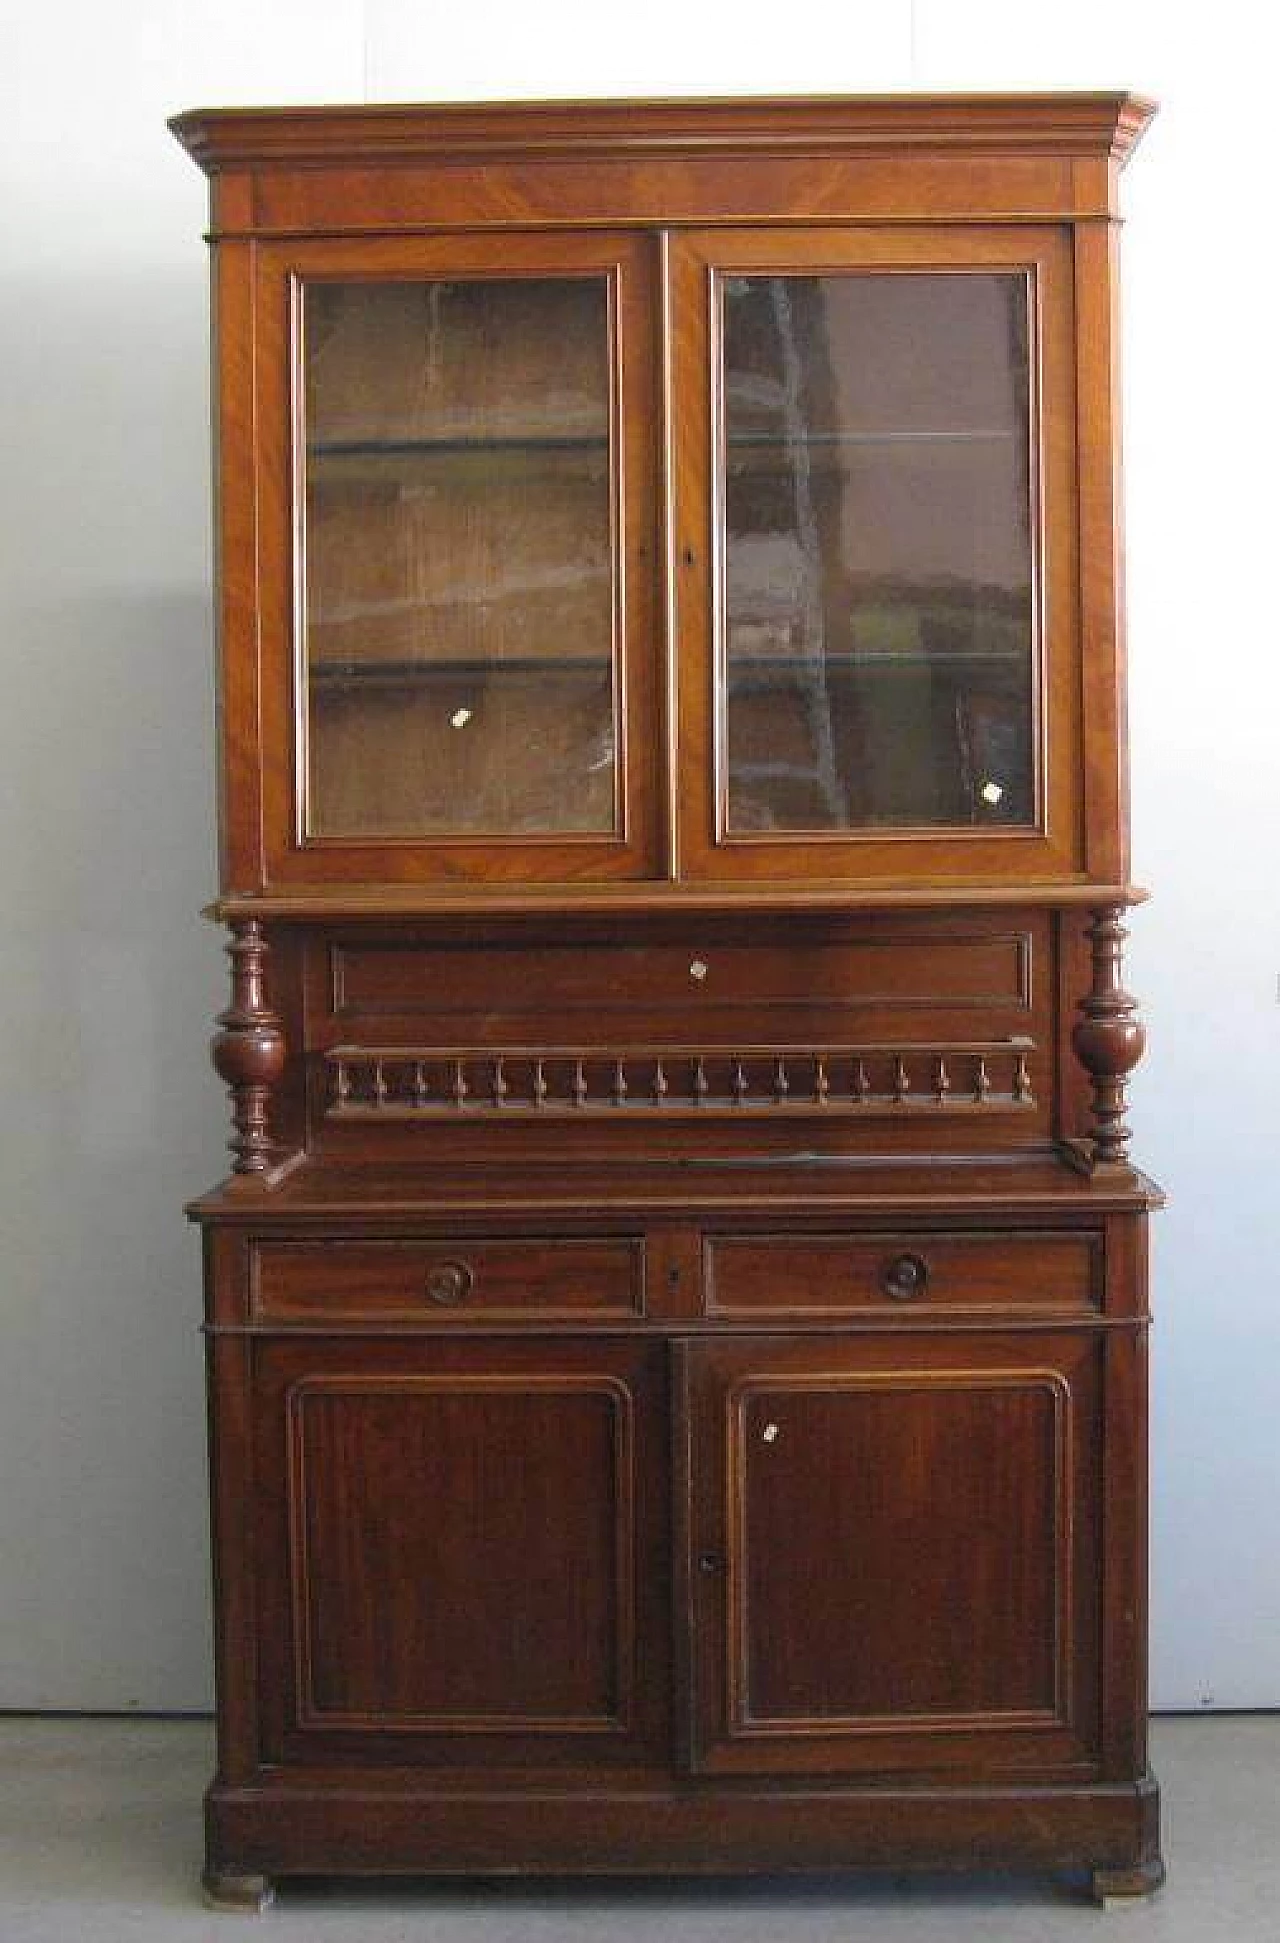 Two-body sideboard in mahogany and glass, 10s 1217687